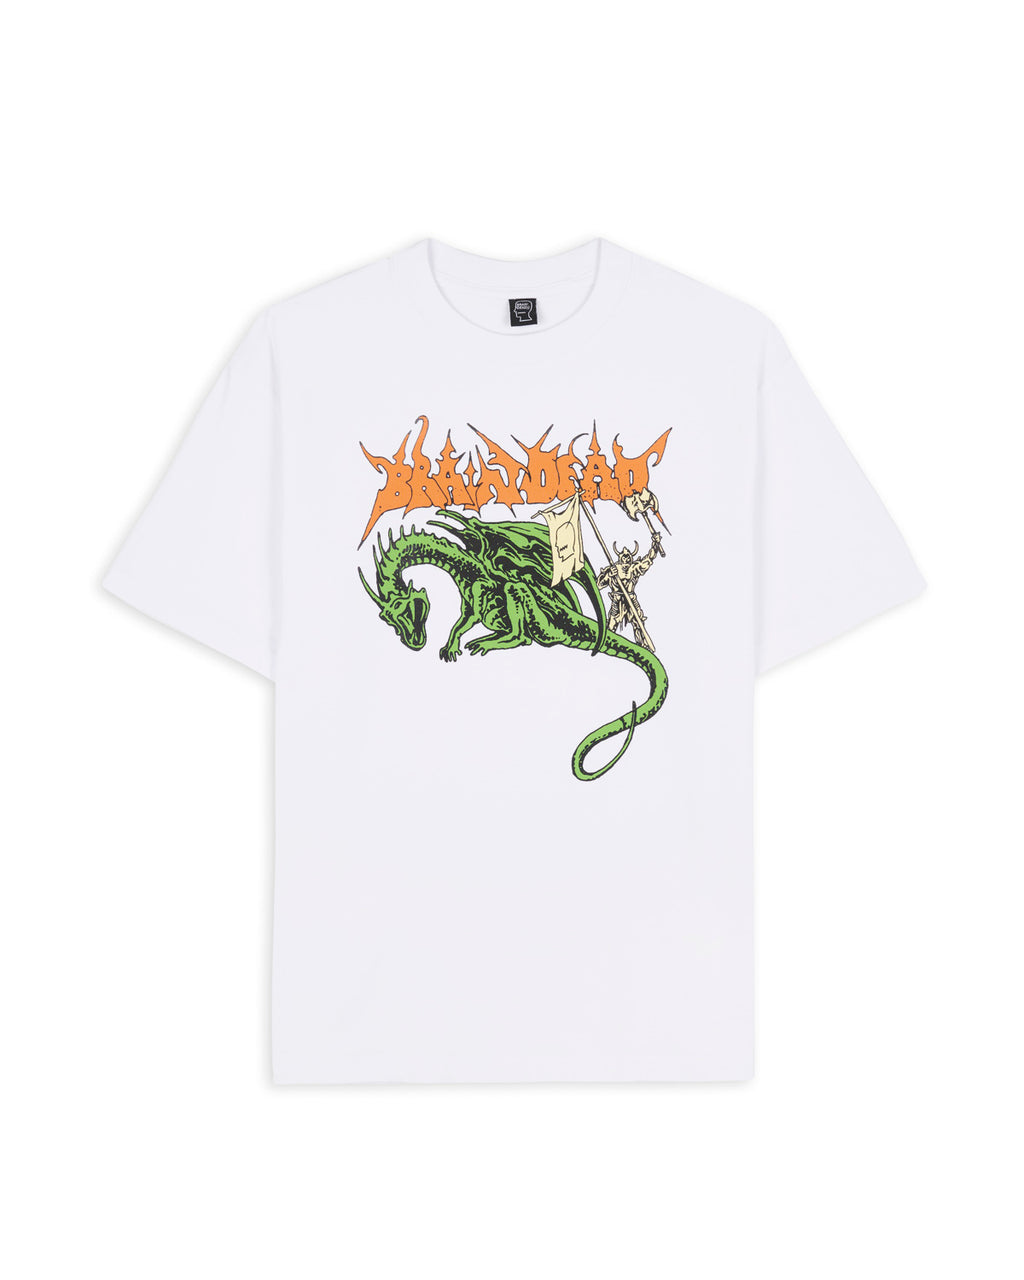 End of Days T-Shirt - White